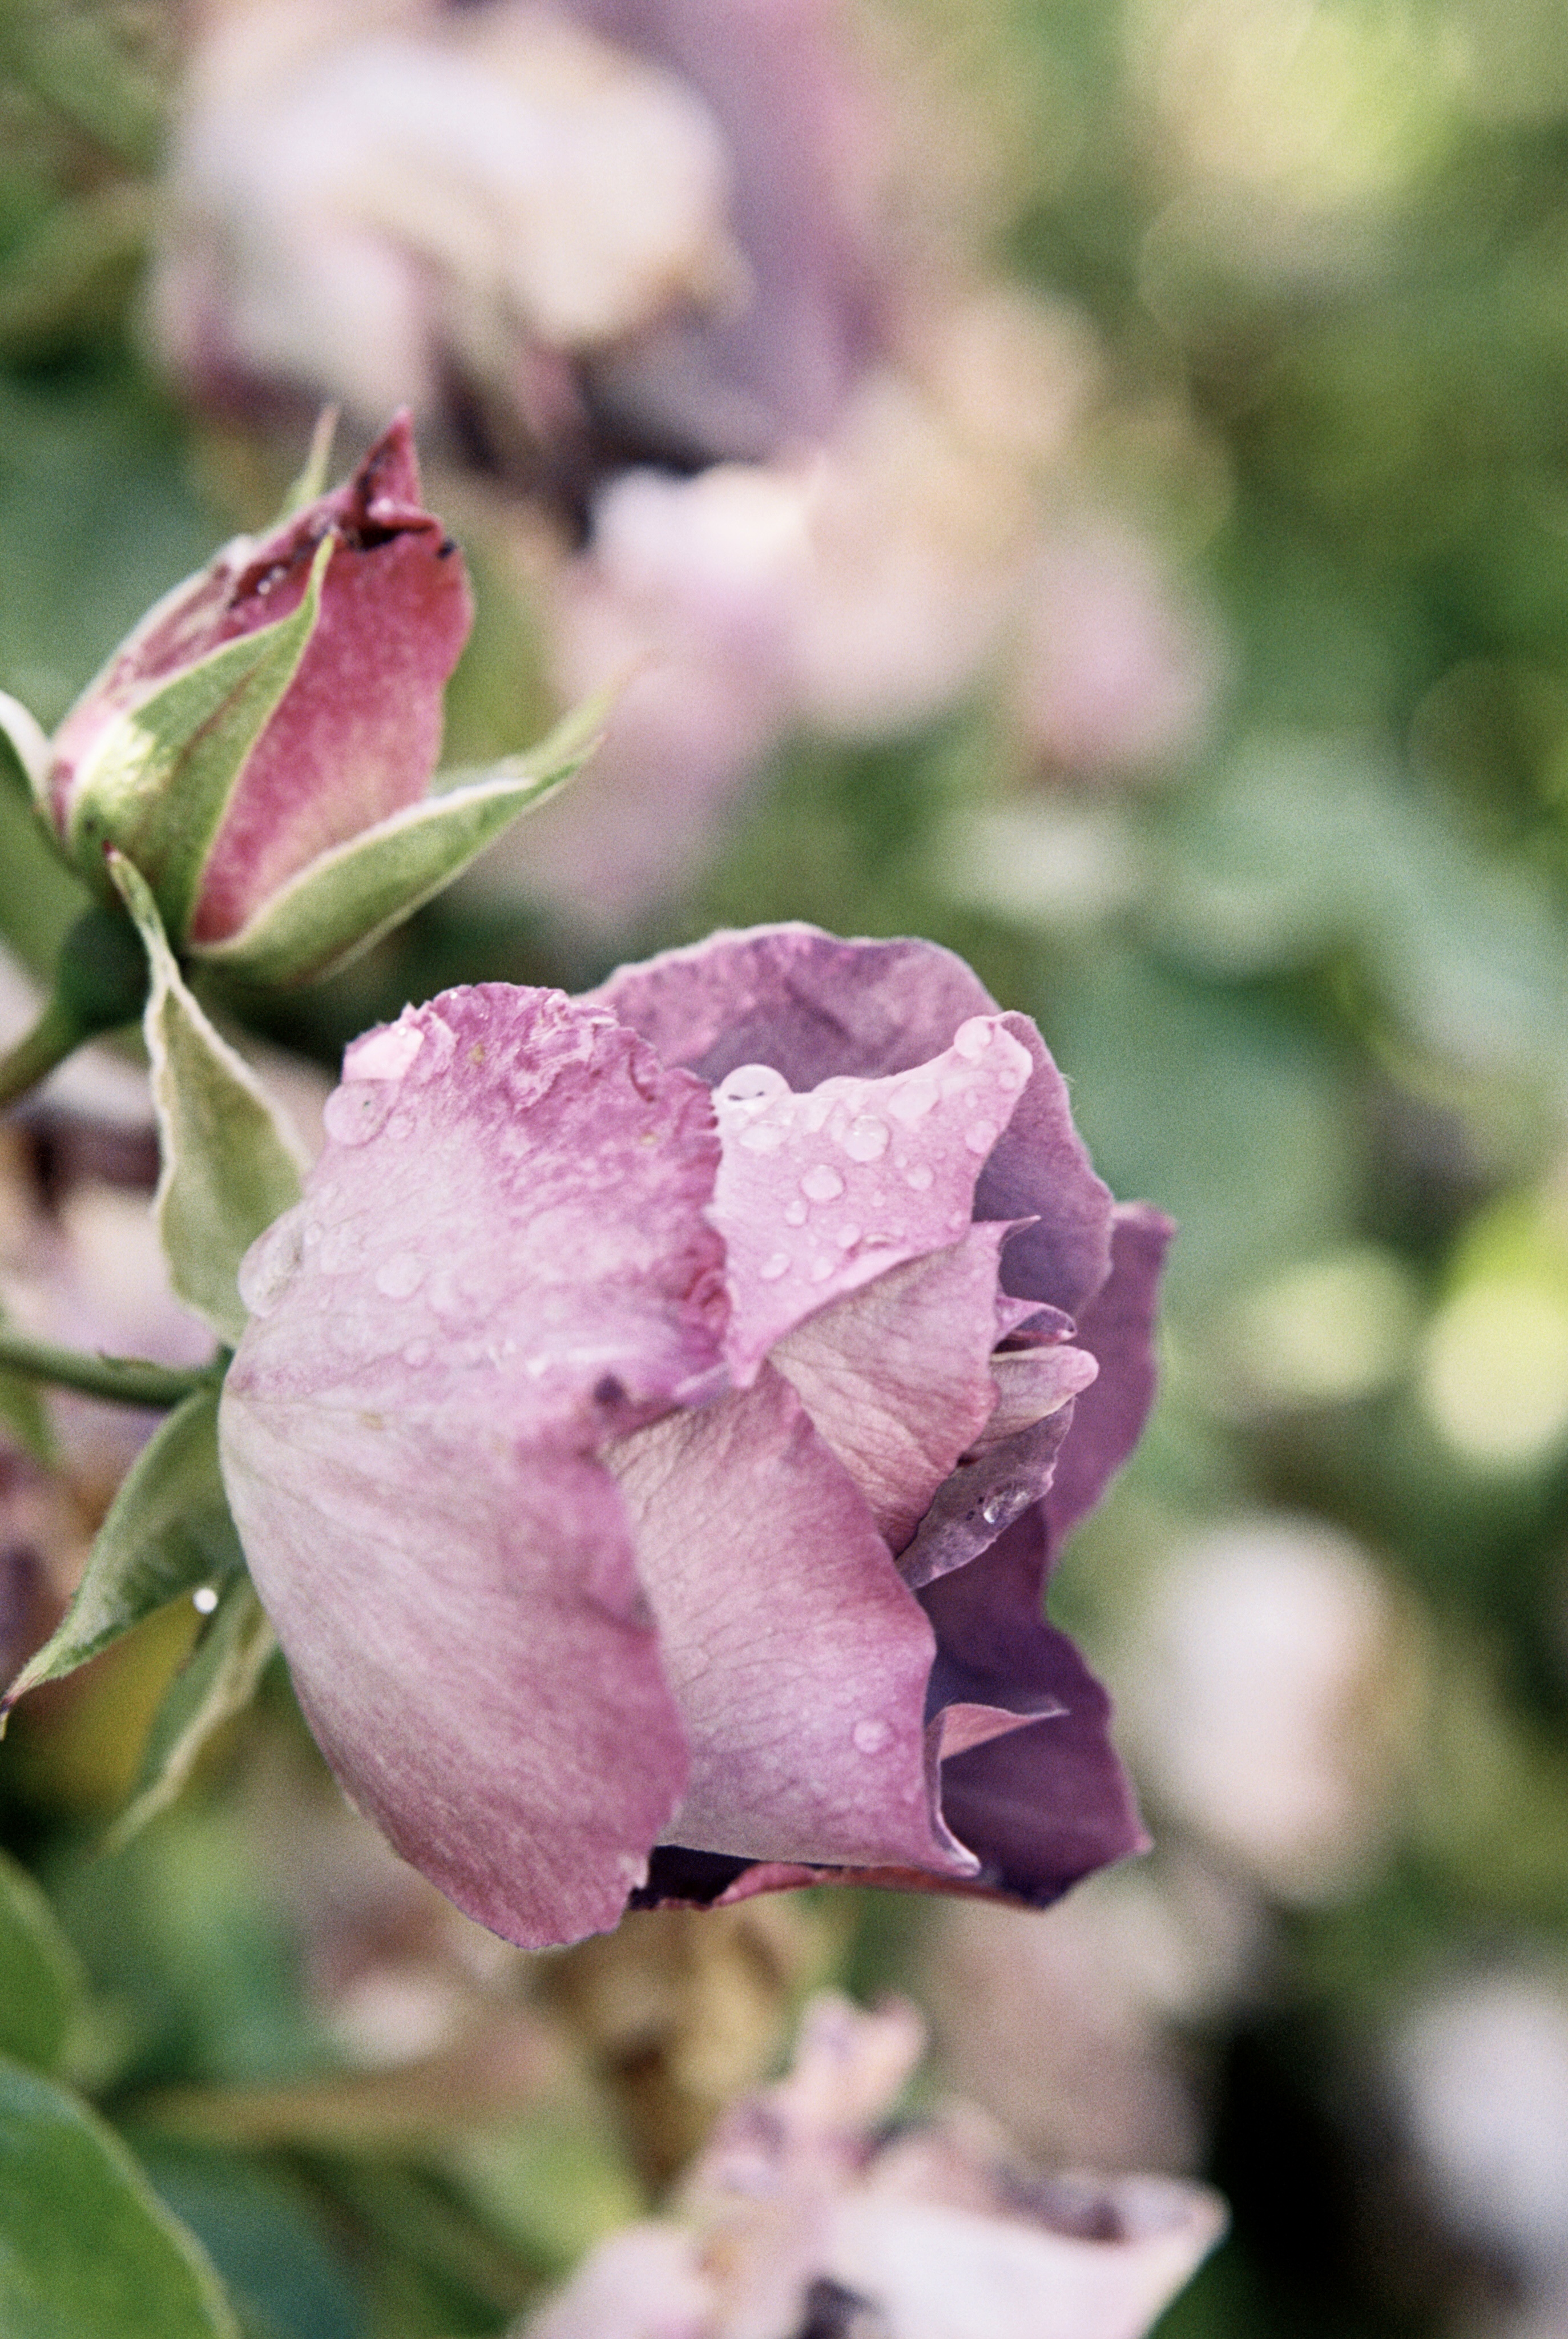 mauve-rose-in-cotswolds-village-with-dew